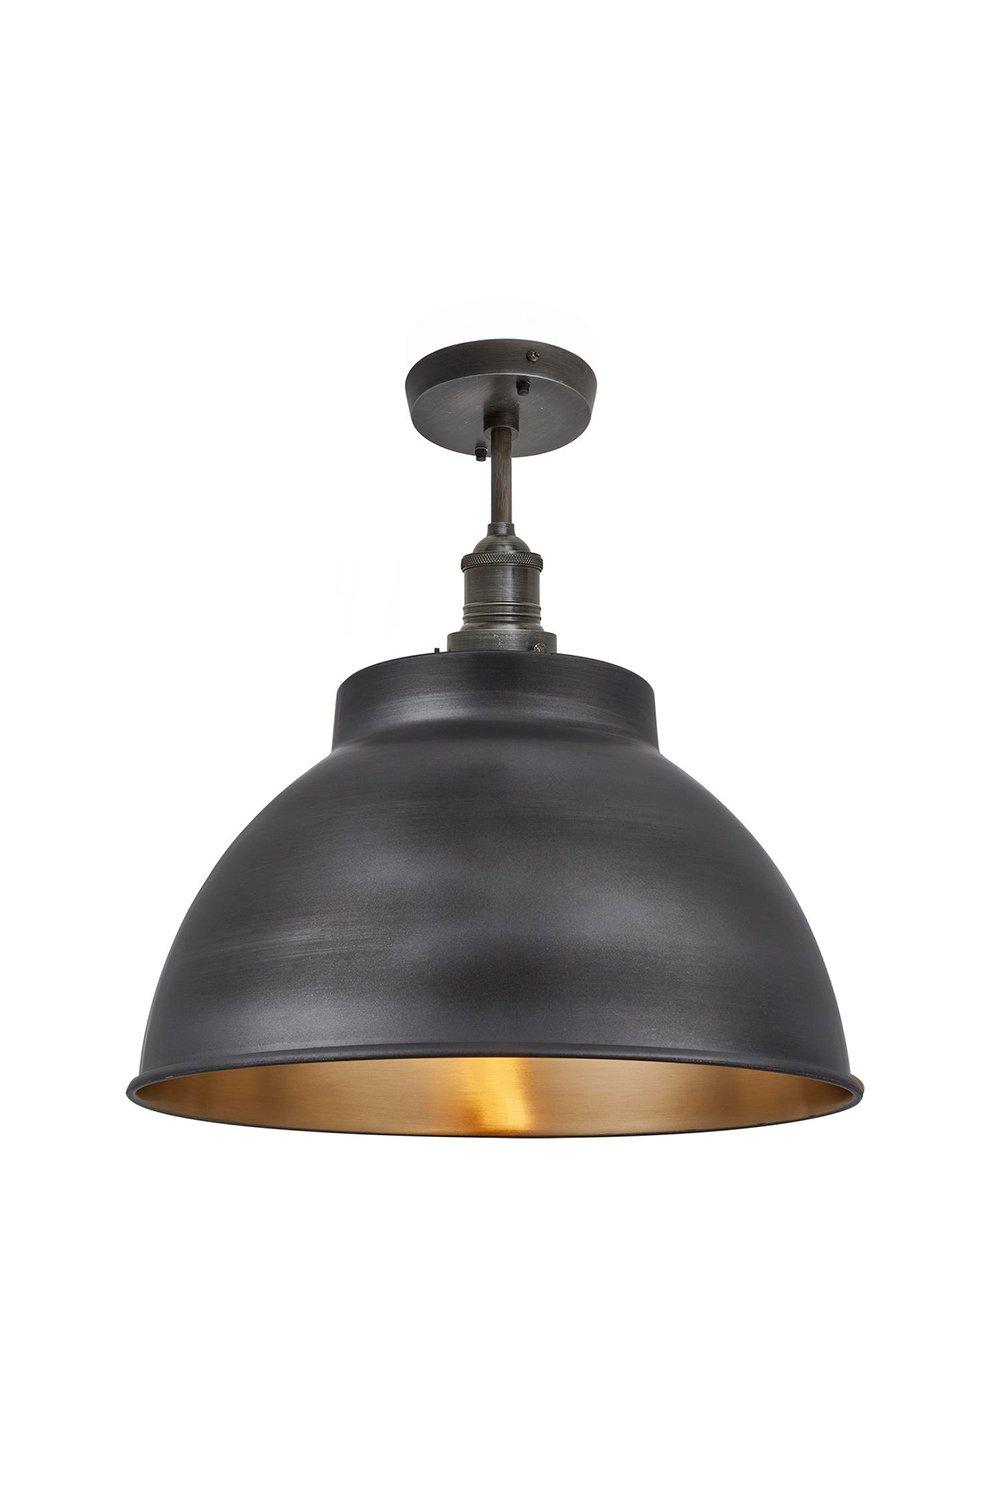 Brooklyn Dome Flush Mount, 13 Inch, Pewter & Brass, Pewter Holder